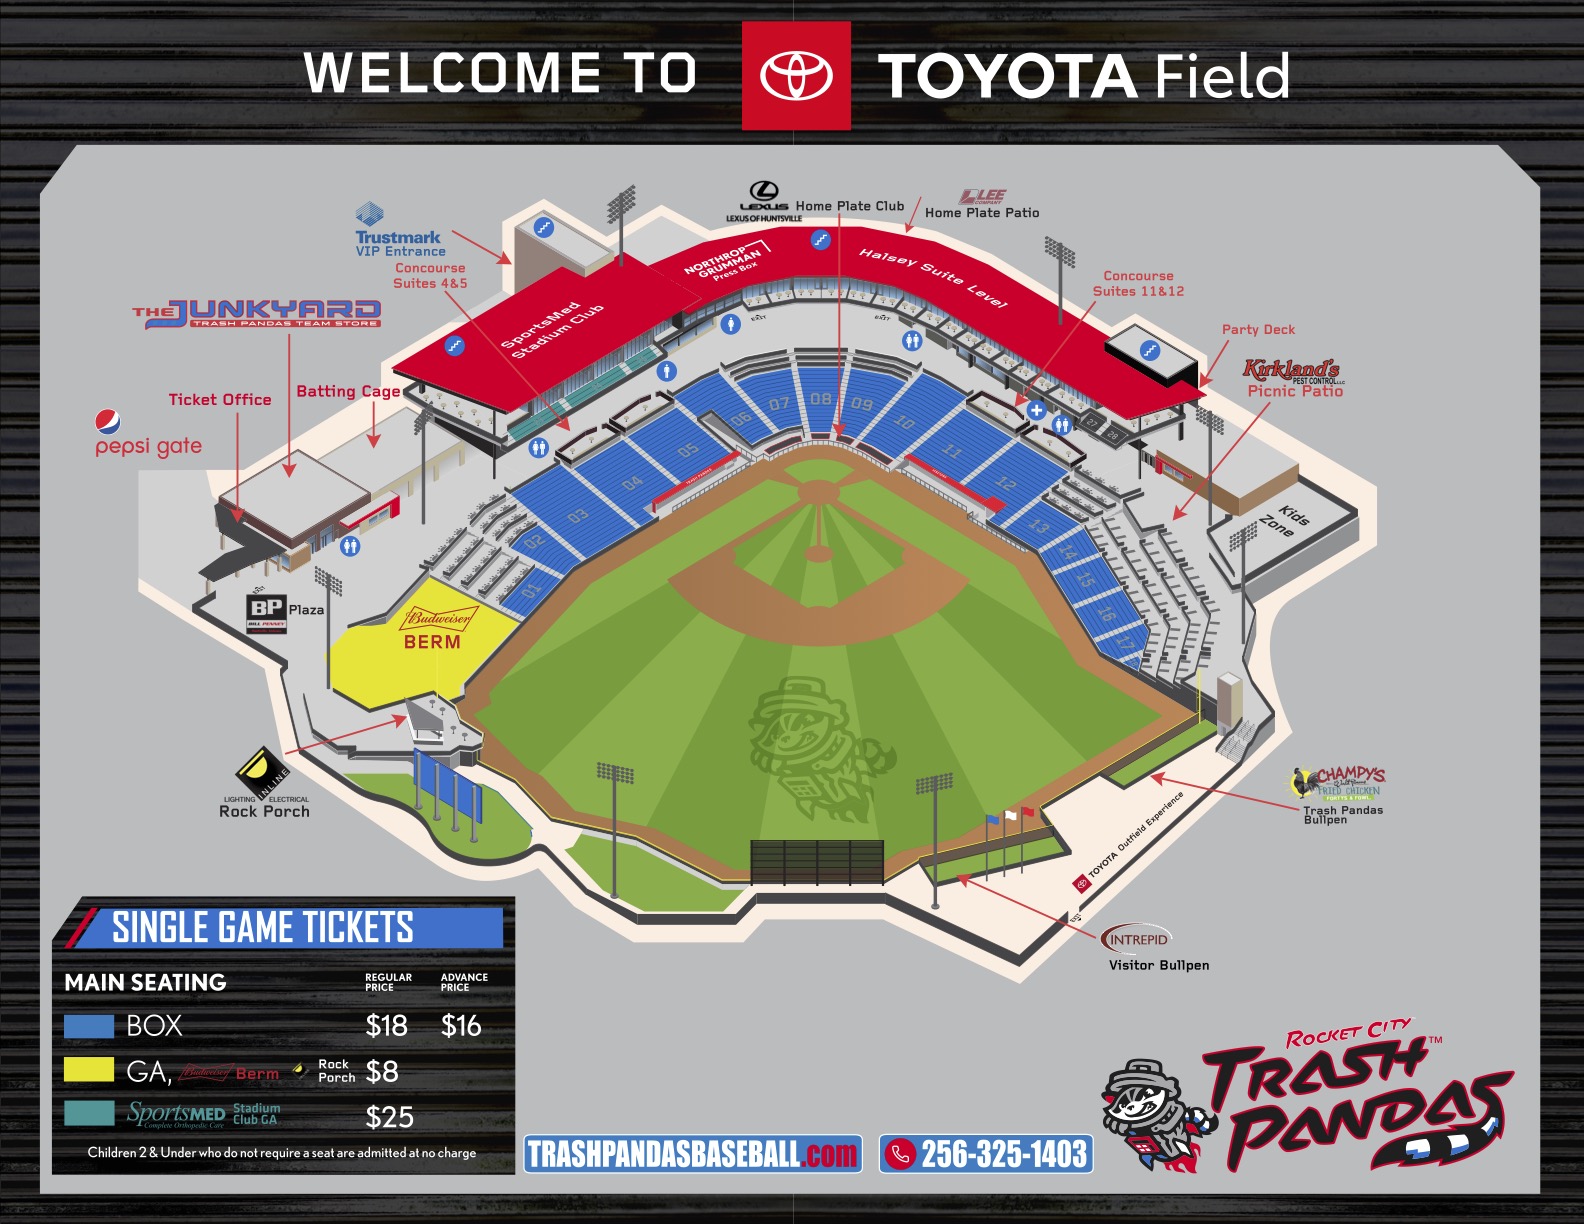 "Discover Toyota Field, the home of the Rocket City Trash Pandas, by visiting MLB.com."